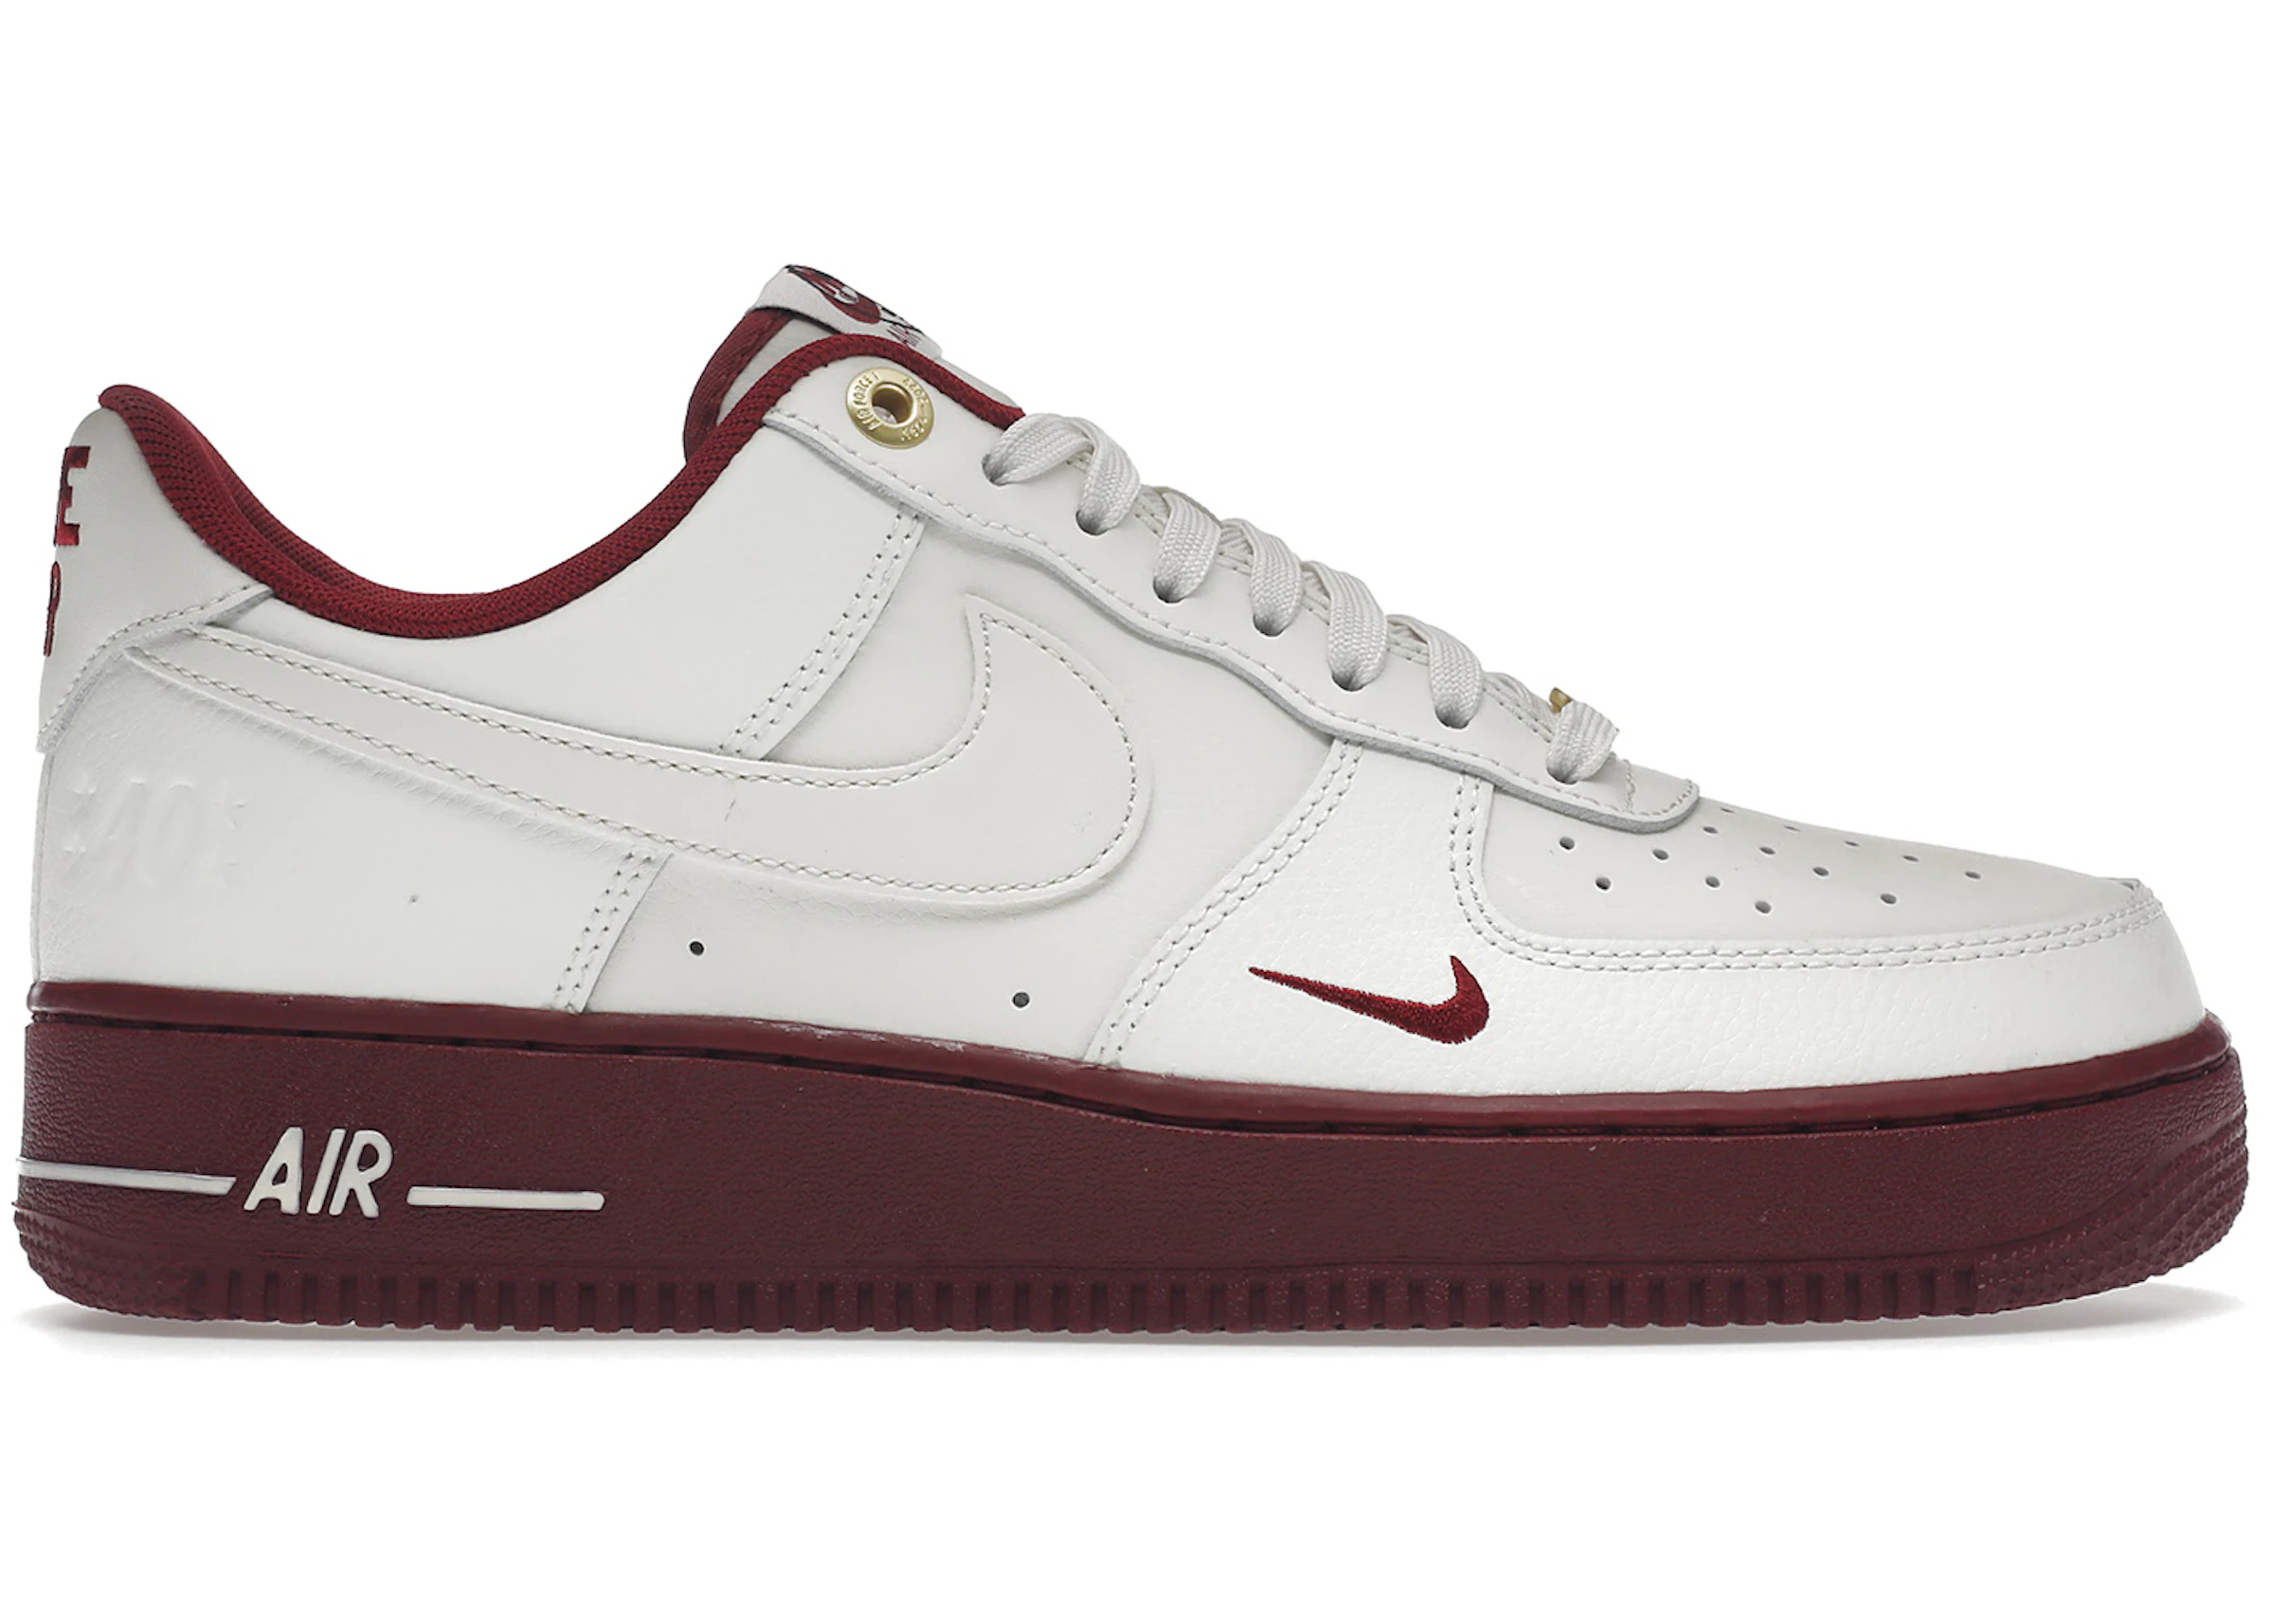 Geleend getrouwd Superioriteit Nike Air Force 1 Low '07 SE 40th Anniversary Edition Sail Team Red  (Women's) - DQ7582-100 - US